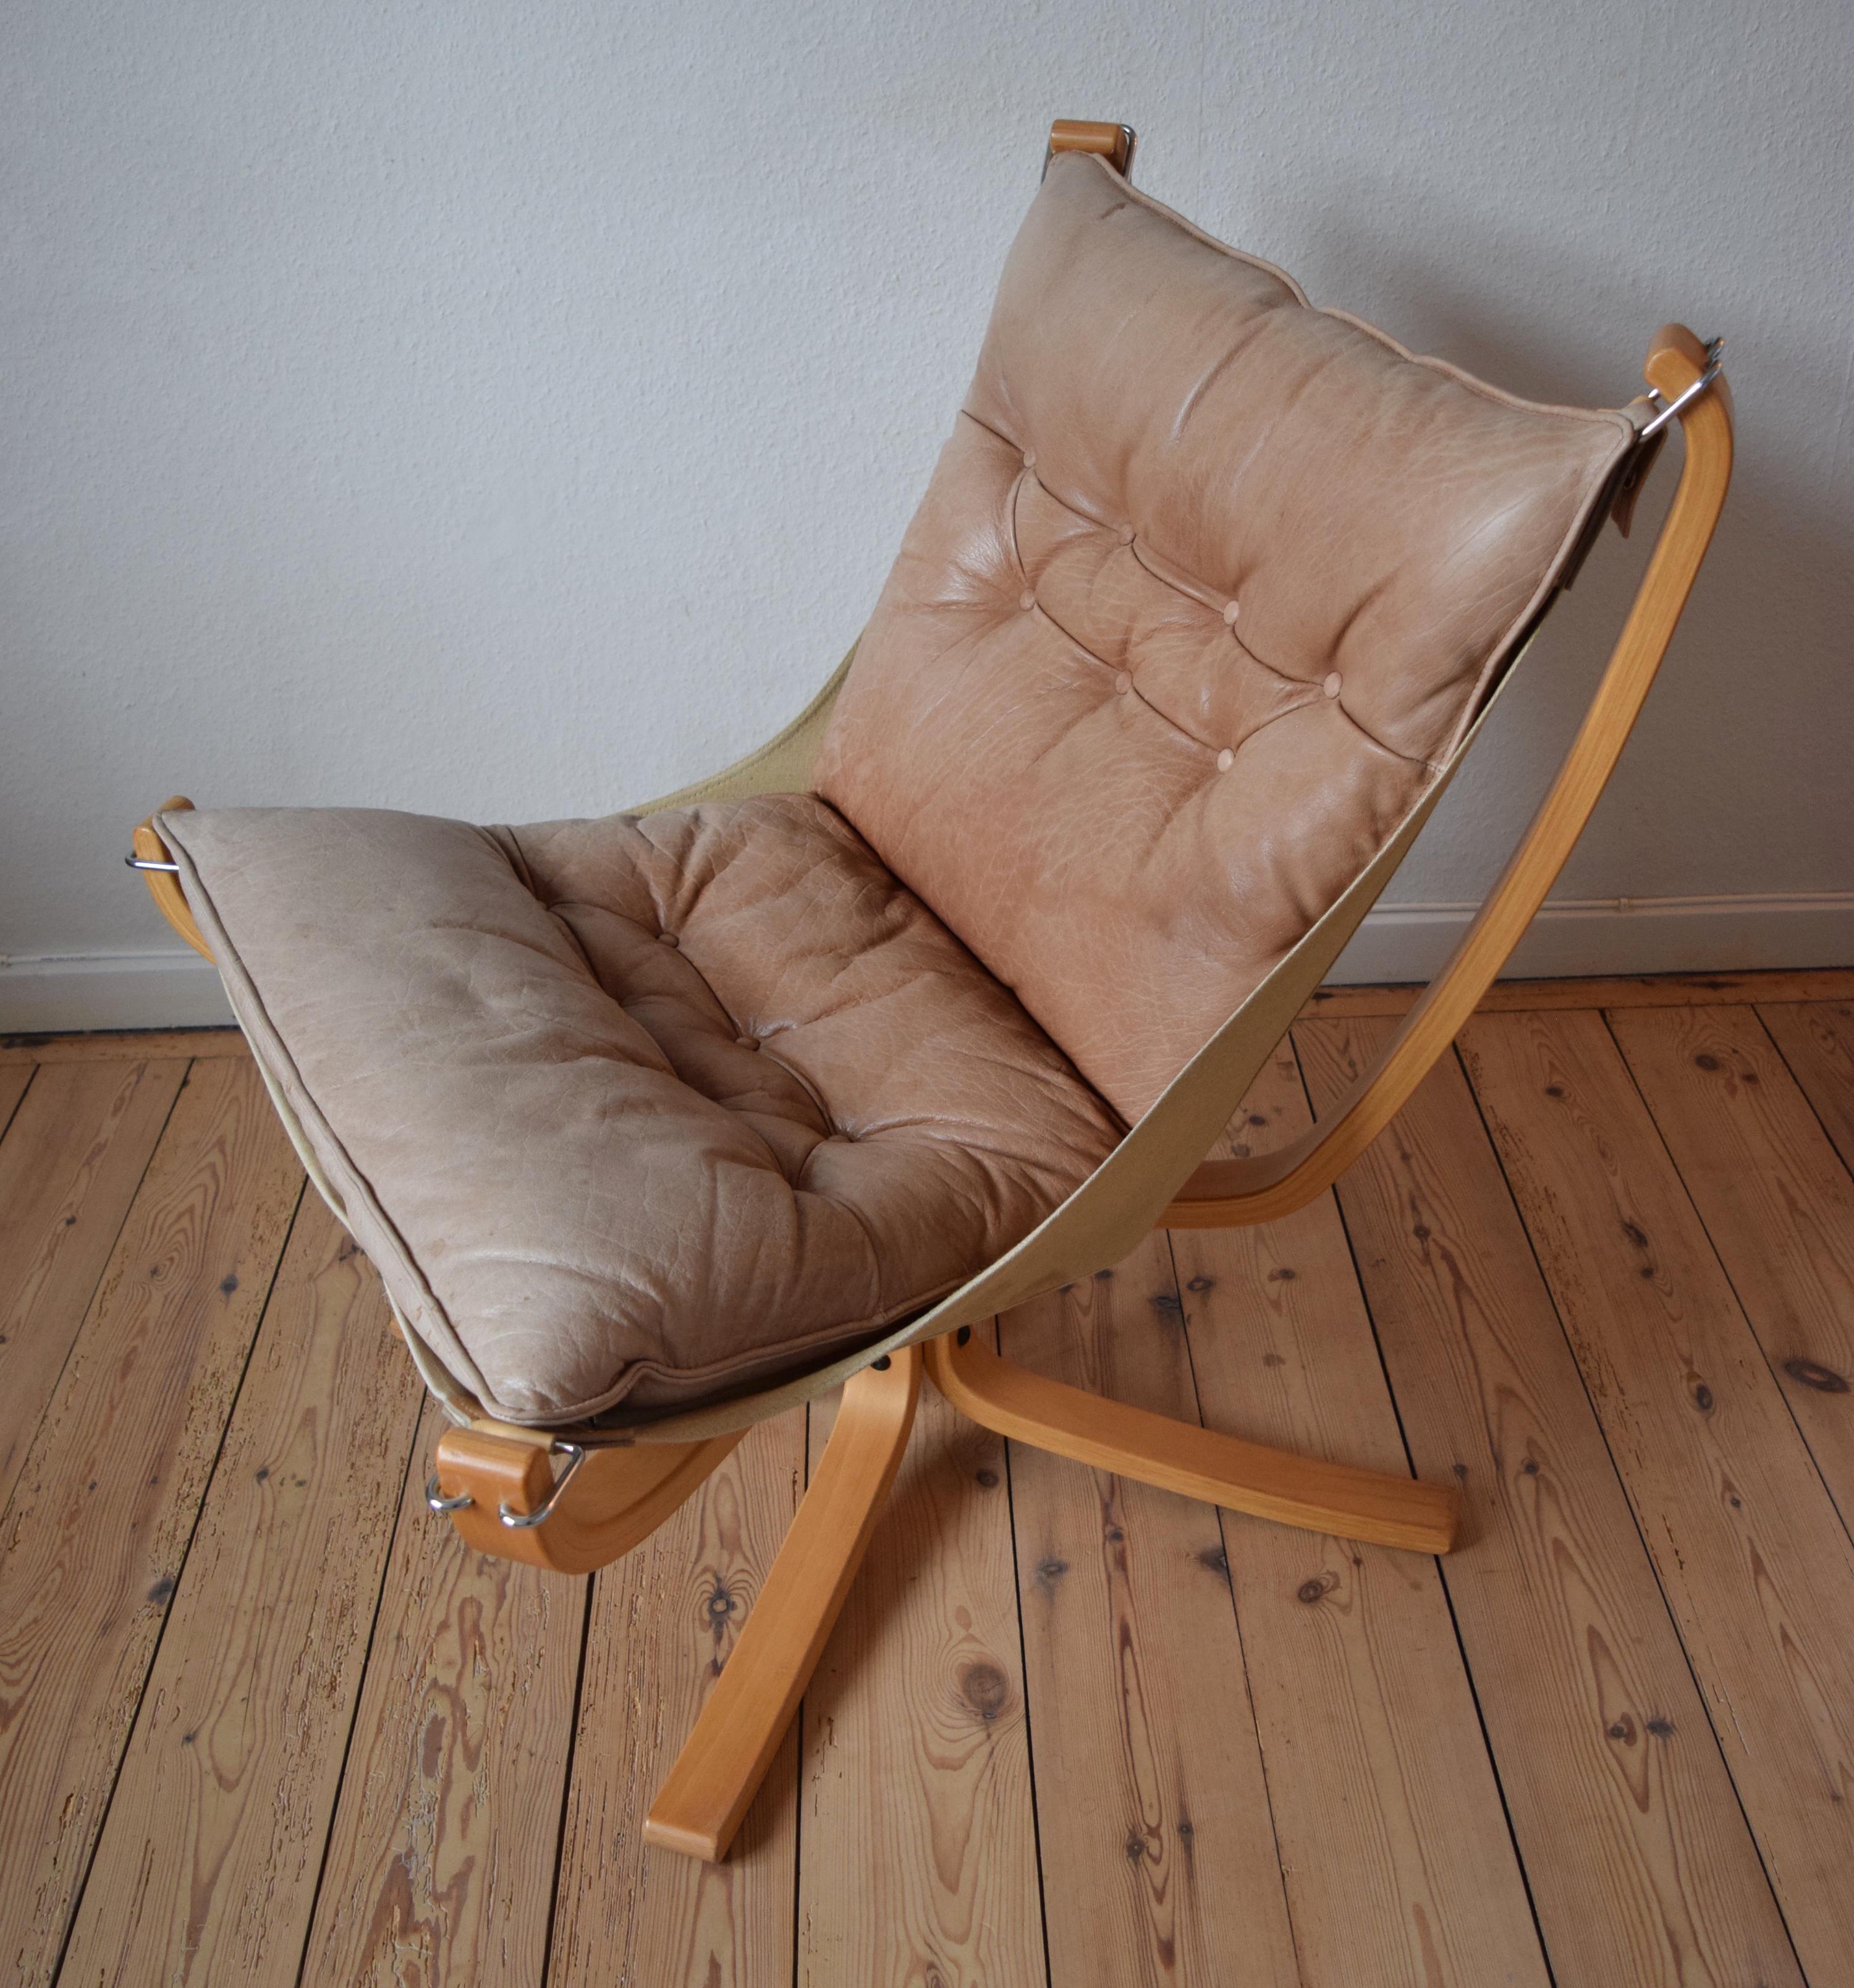 Falcon chair designed by Sigurd Ressel and manufactured by Vatne Møbler in Norway in the 1970s. Features light cognac leather cushion and sits on a canvas hammock. Bent beechwood legs. The leather is in great shape and is still soft and supple.